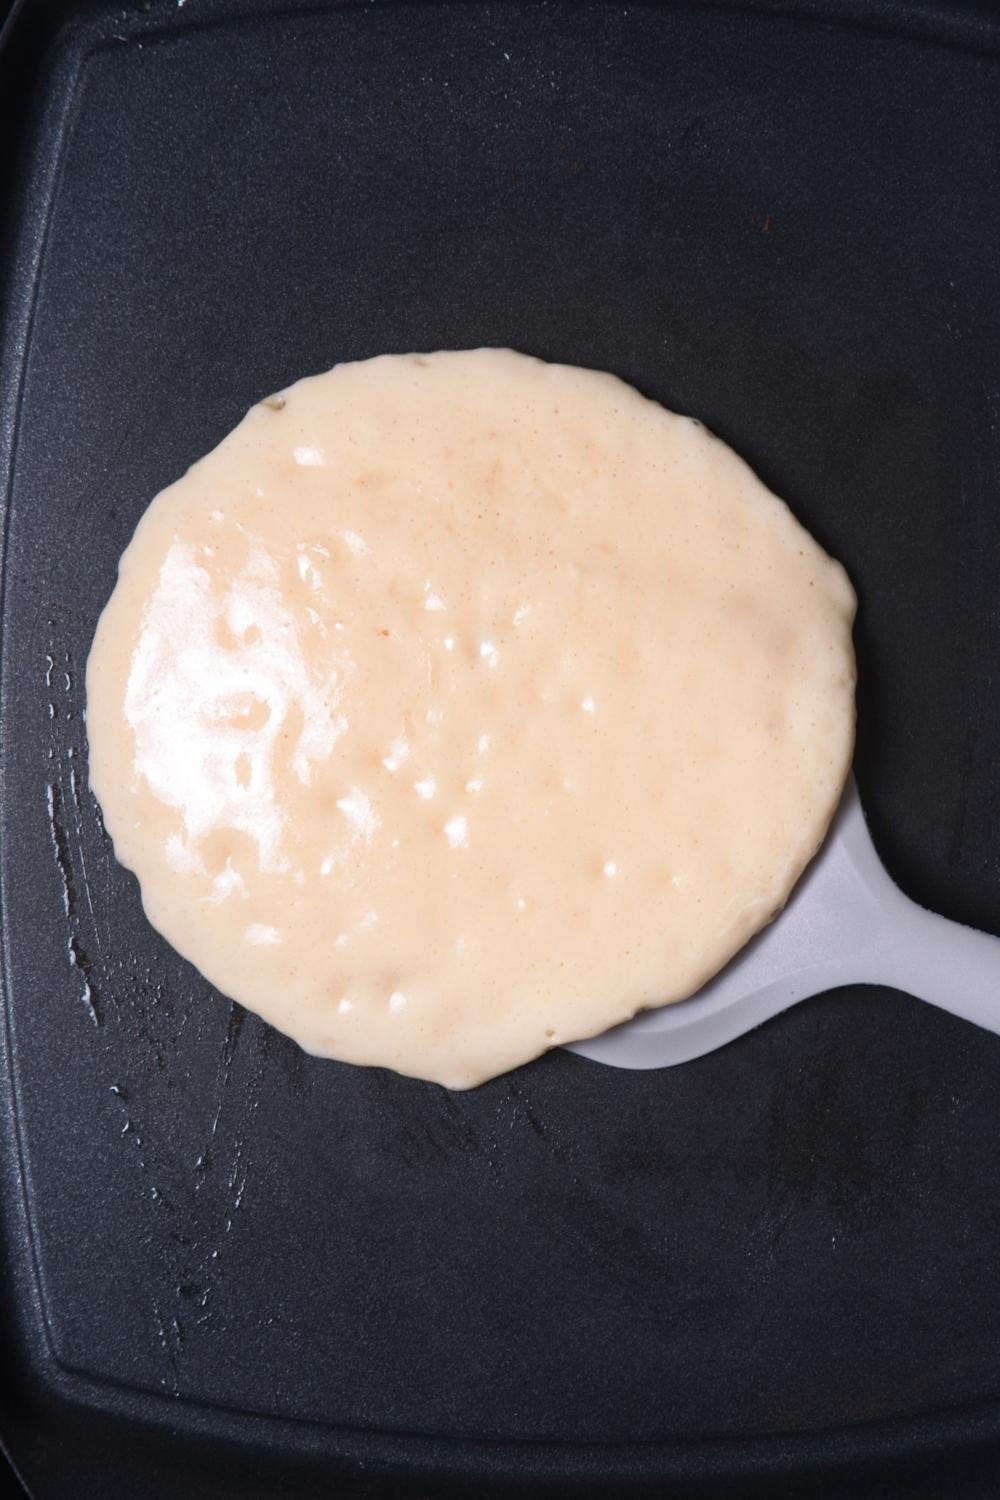 A half cooked pancake being flipped by a spatula on a hot griddle.